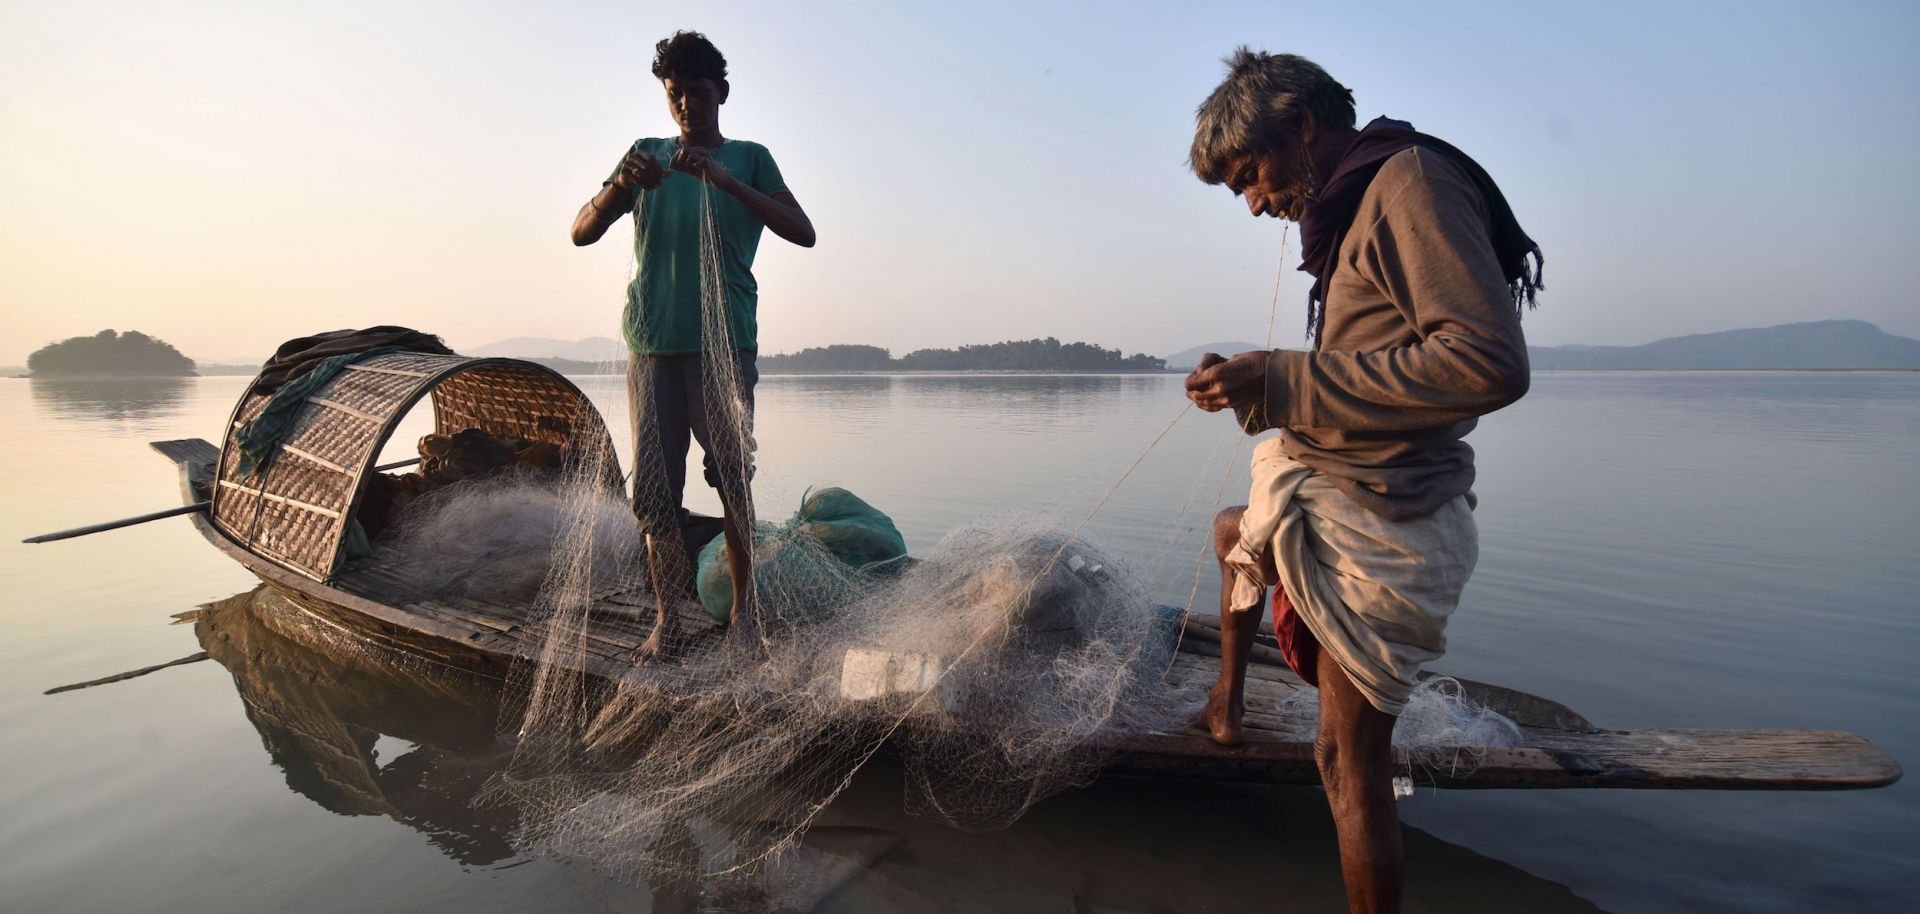 Fishermen get ready to cast their net on the Brahmaputra River, part of a massive river system that India shares with China, Nepal, Bhutan and Bangladesh.